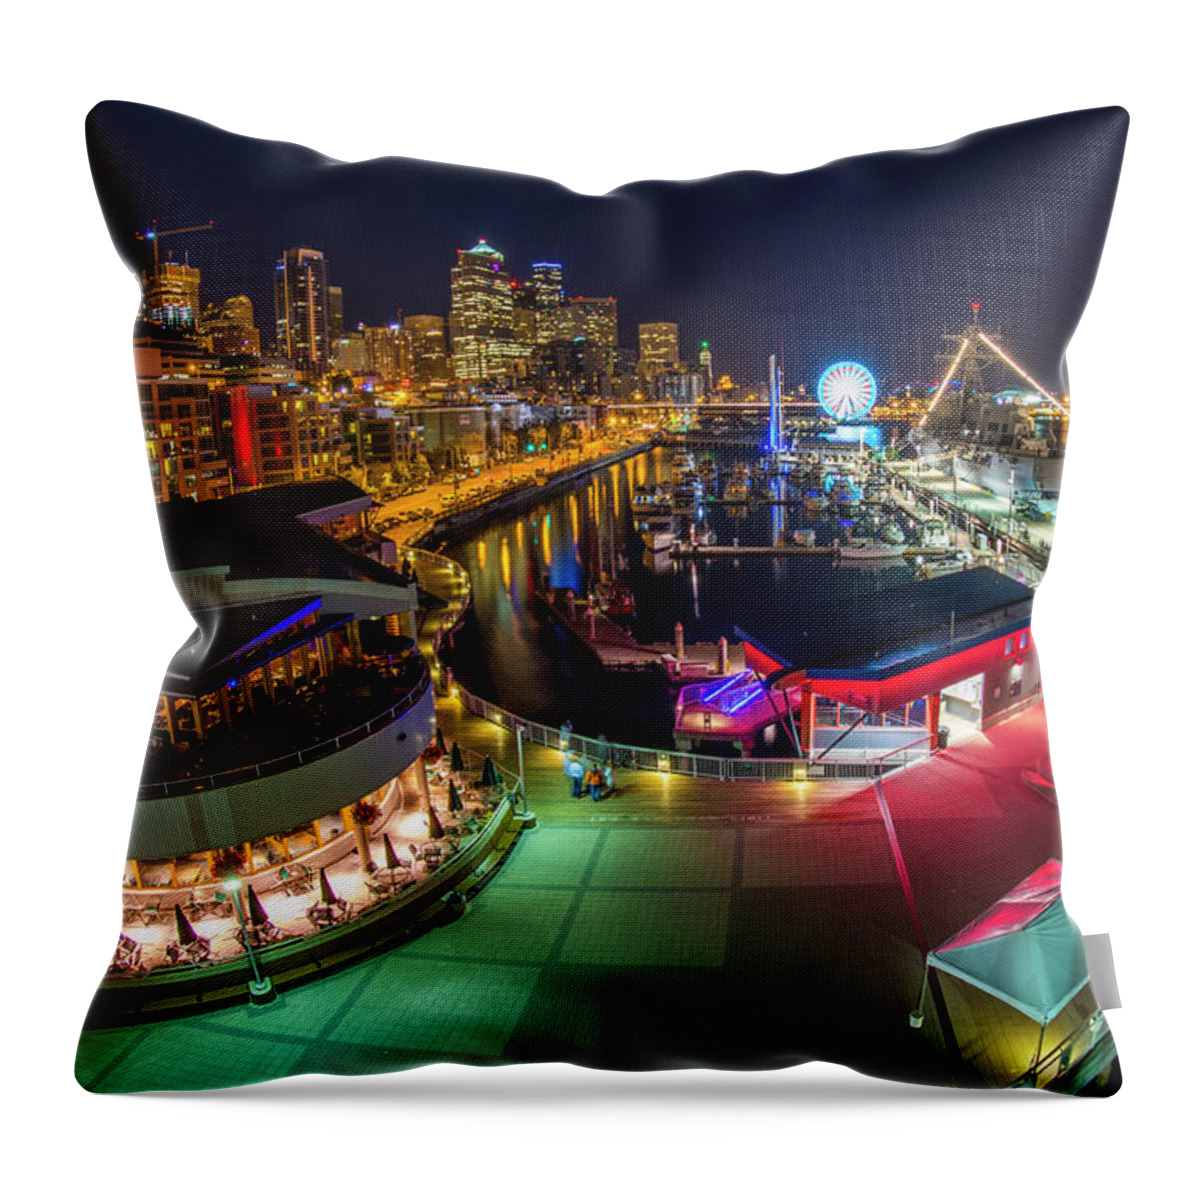 Seattle Throw Pillow featuring the photograph Seattle Waterfront by Matt McDonald